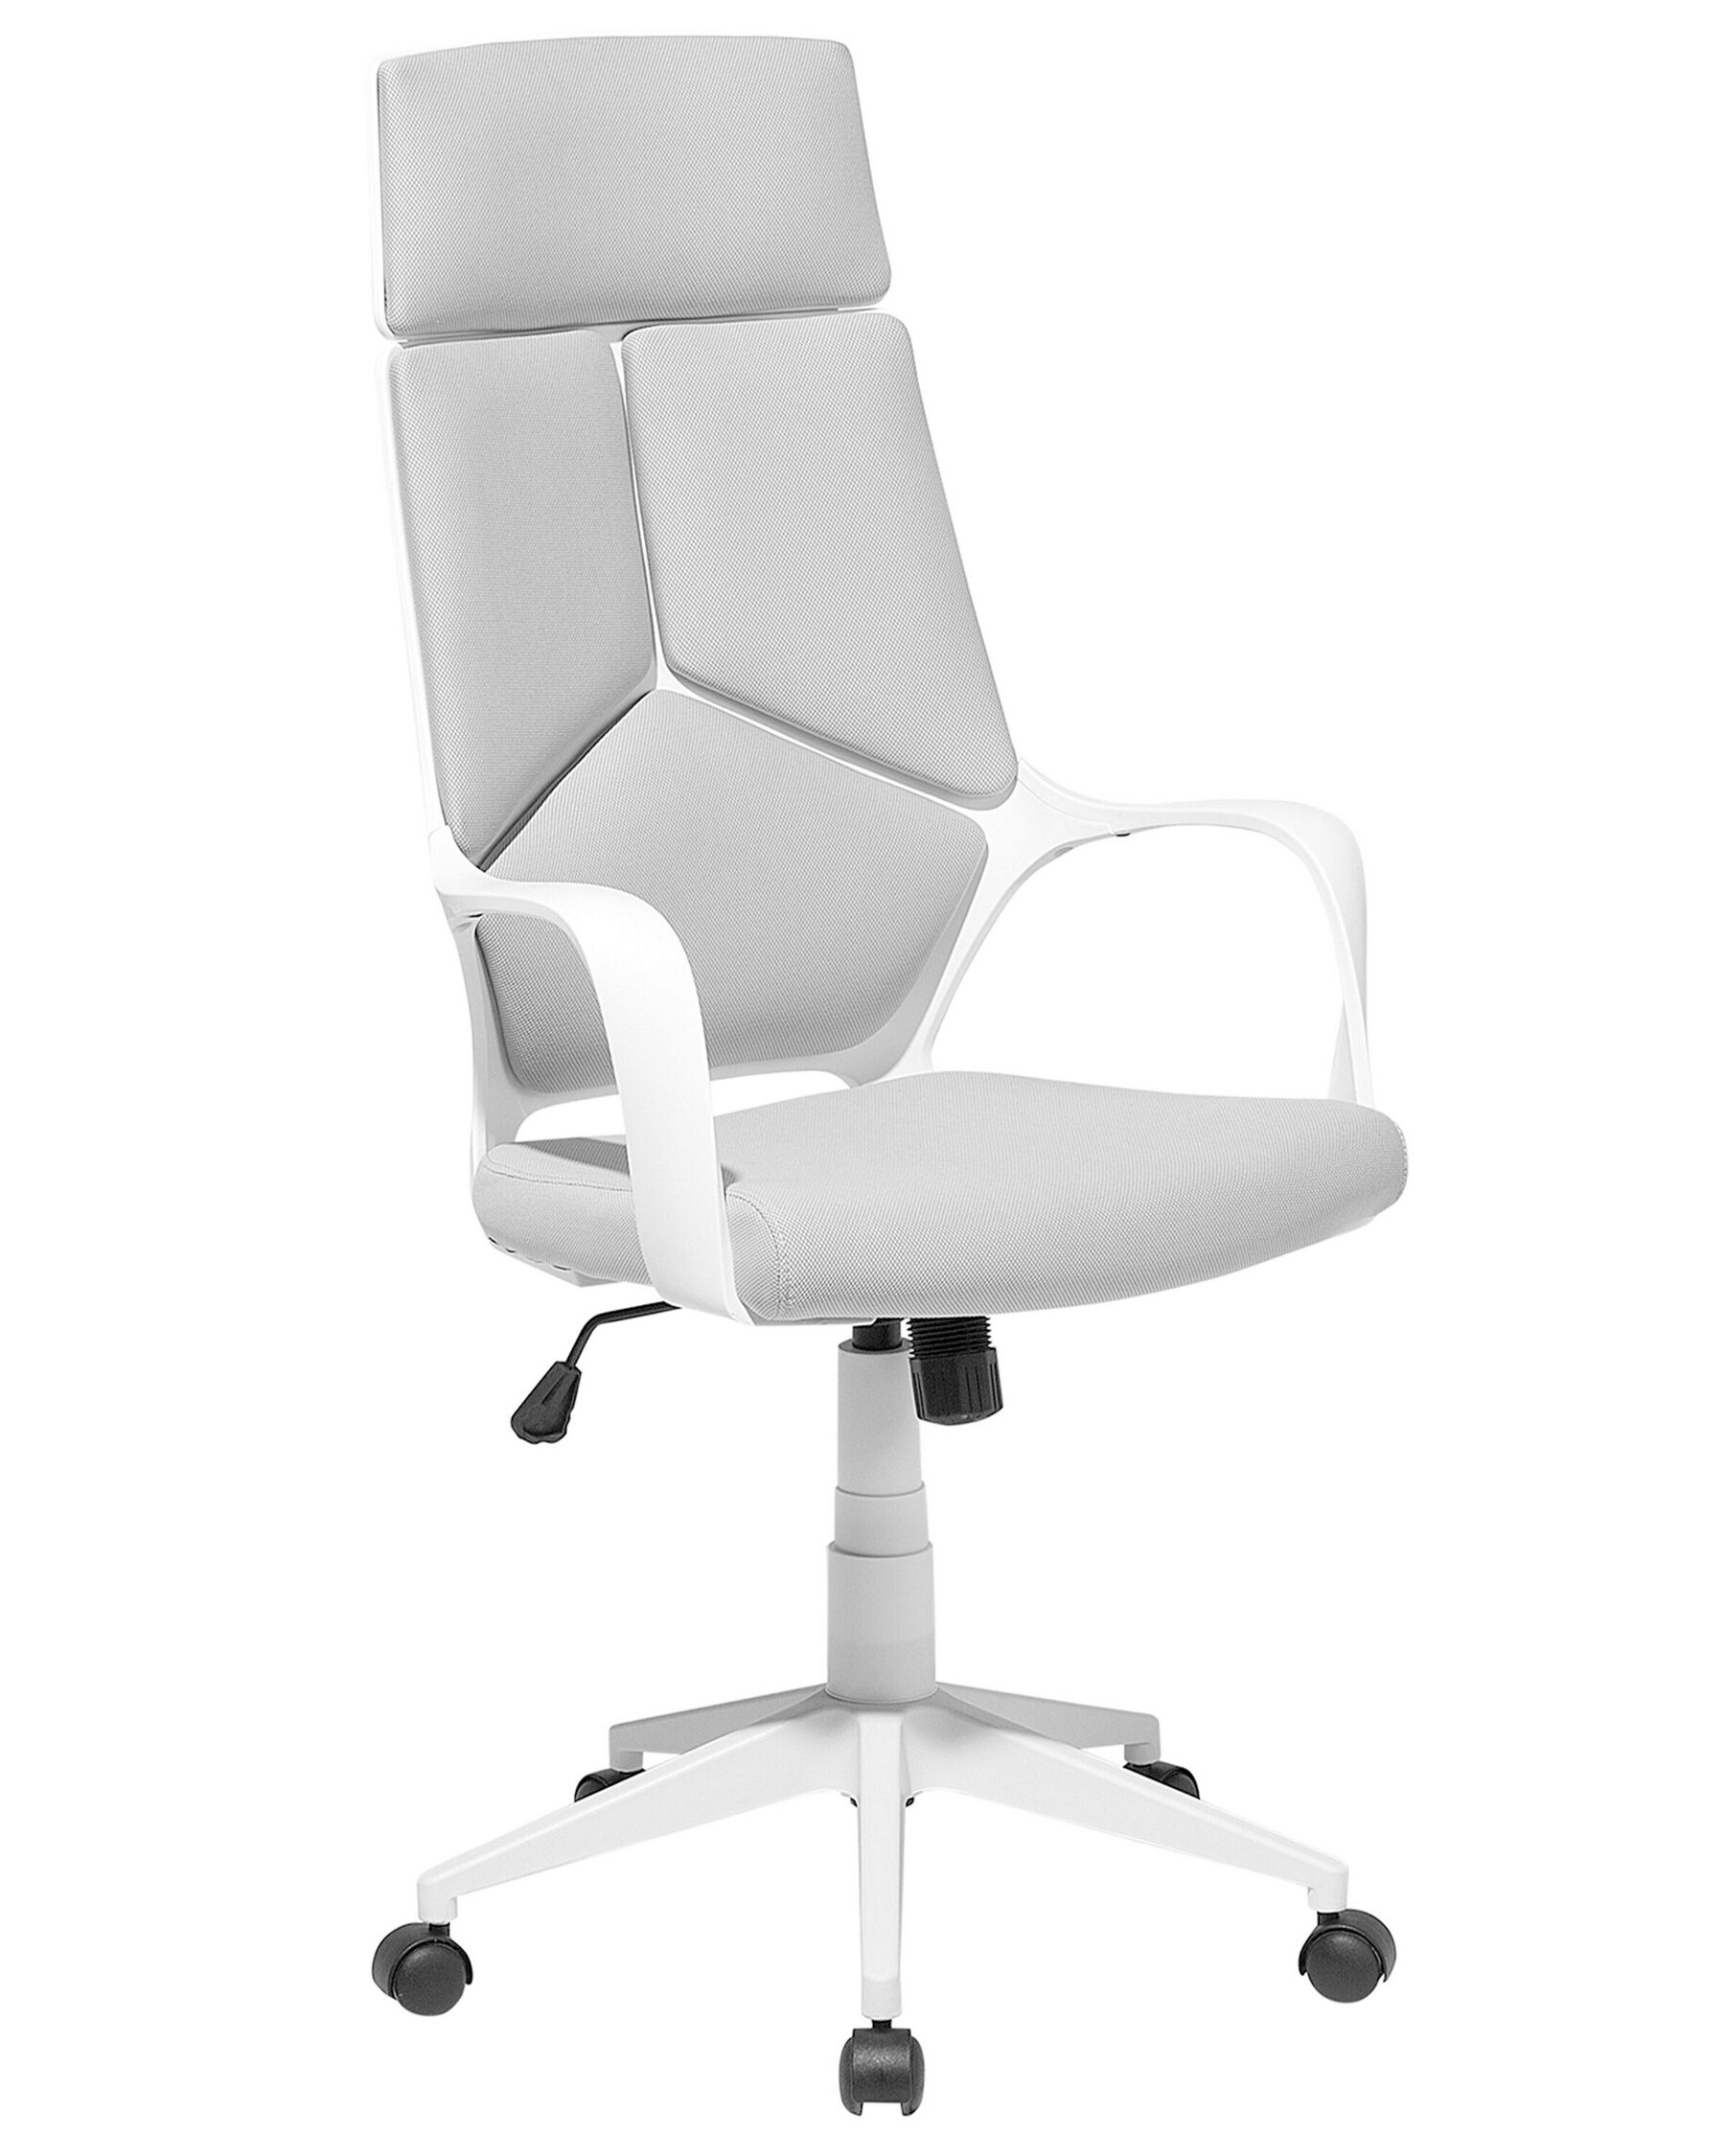 Swivel Office Chair Grey and White DELIGHT_688461